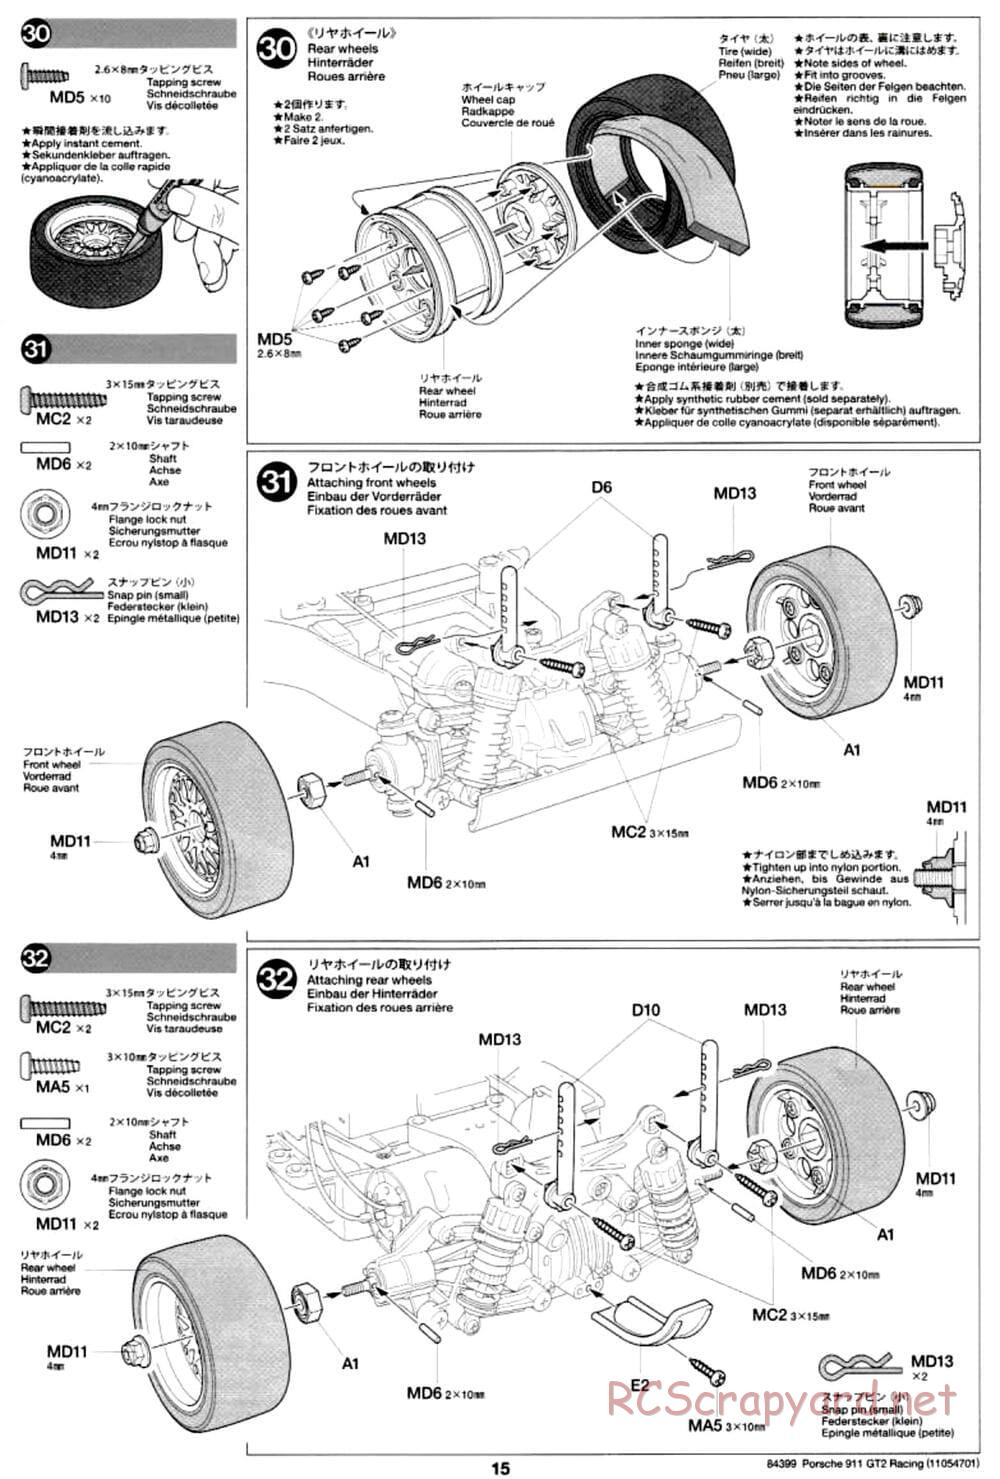 Tamiya - Porsche 911 GT2 Racing - TA02SW Chassis - Manual - Page 15